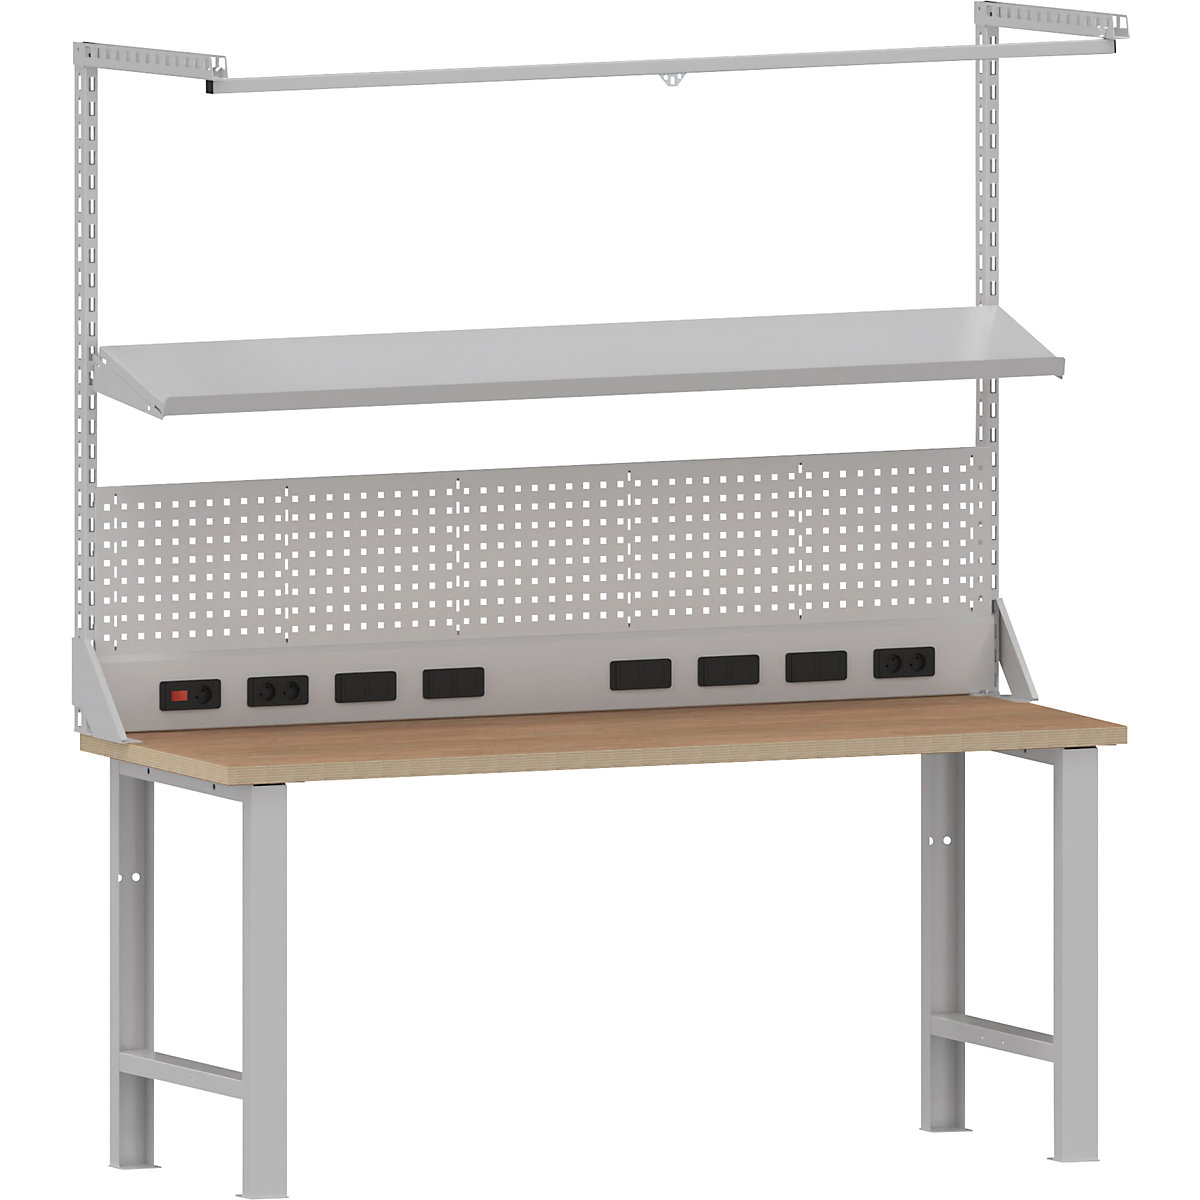 Multifunctional add-on module for workbench – LISTA, with perforated panel, equipment rail, adjustable shelf and rear power panel, width 2000 mm